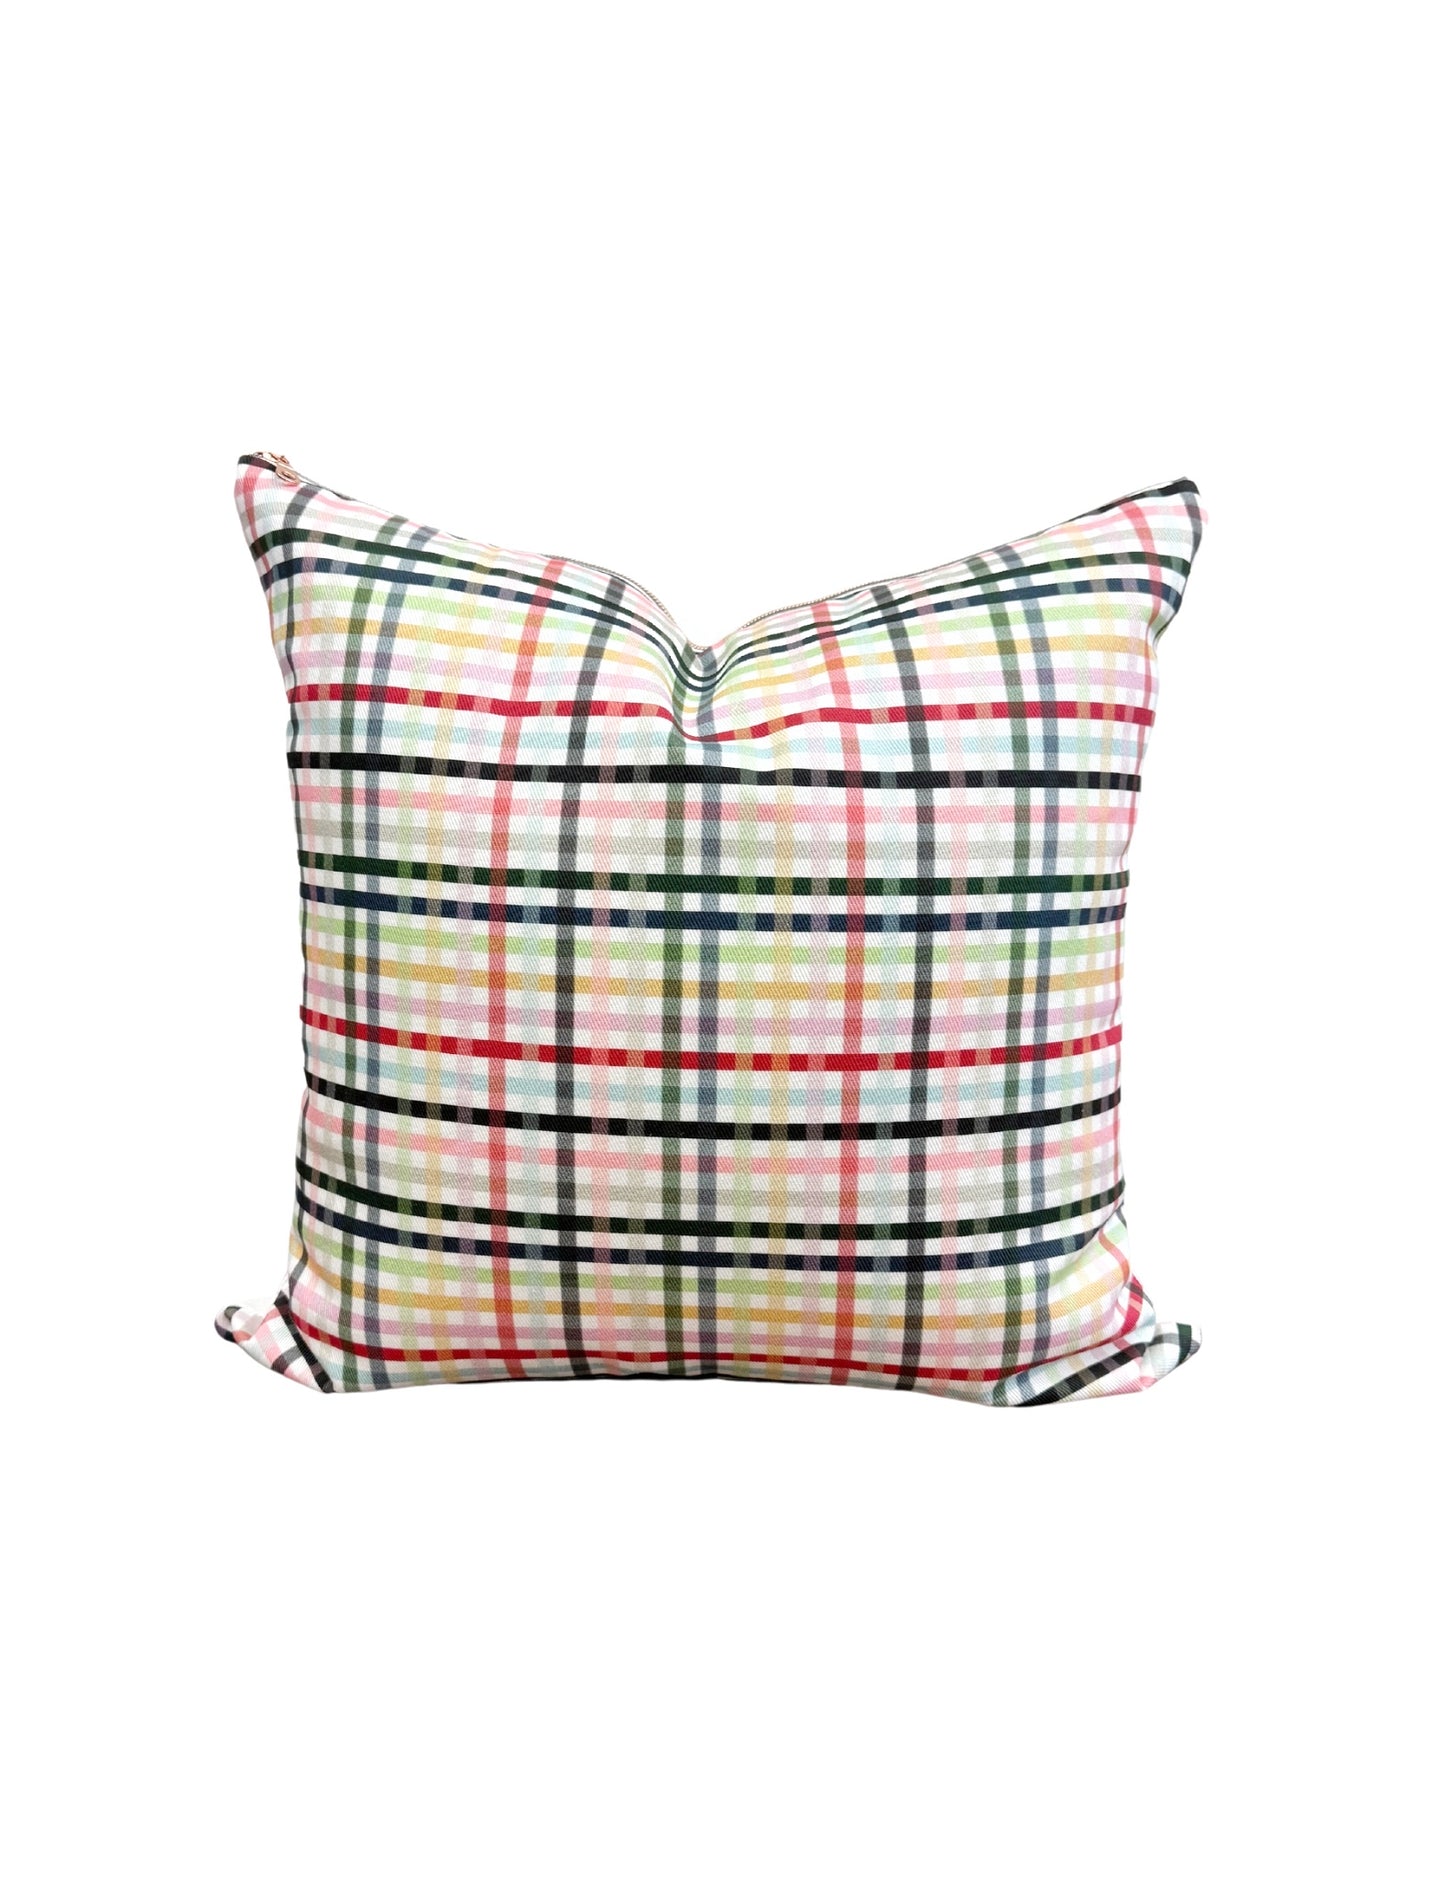 Taylor Swift - Eras Gingham Pillow Cover